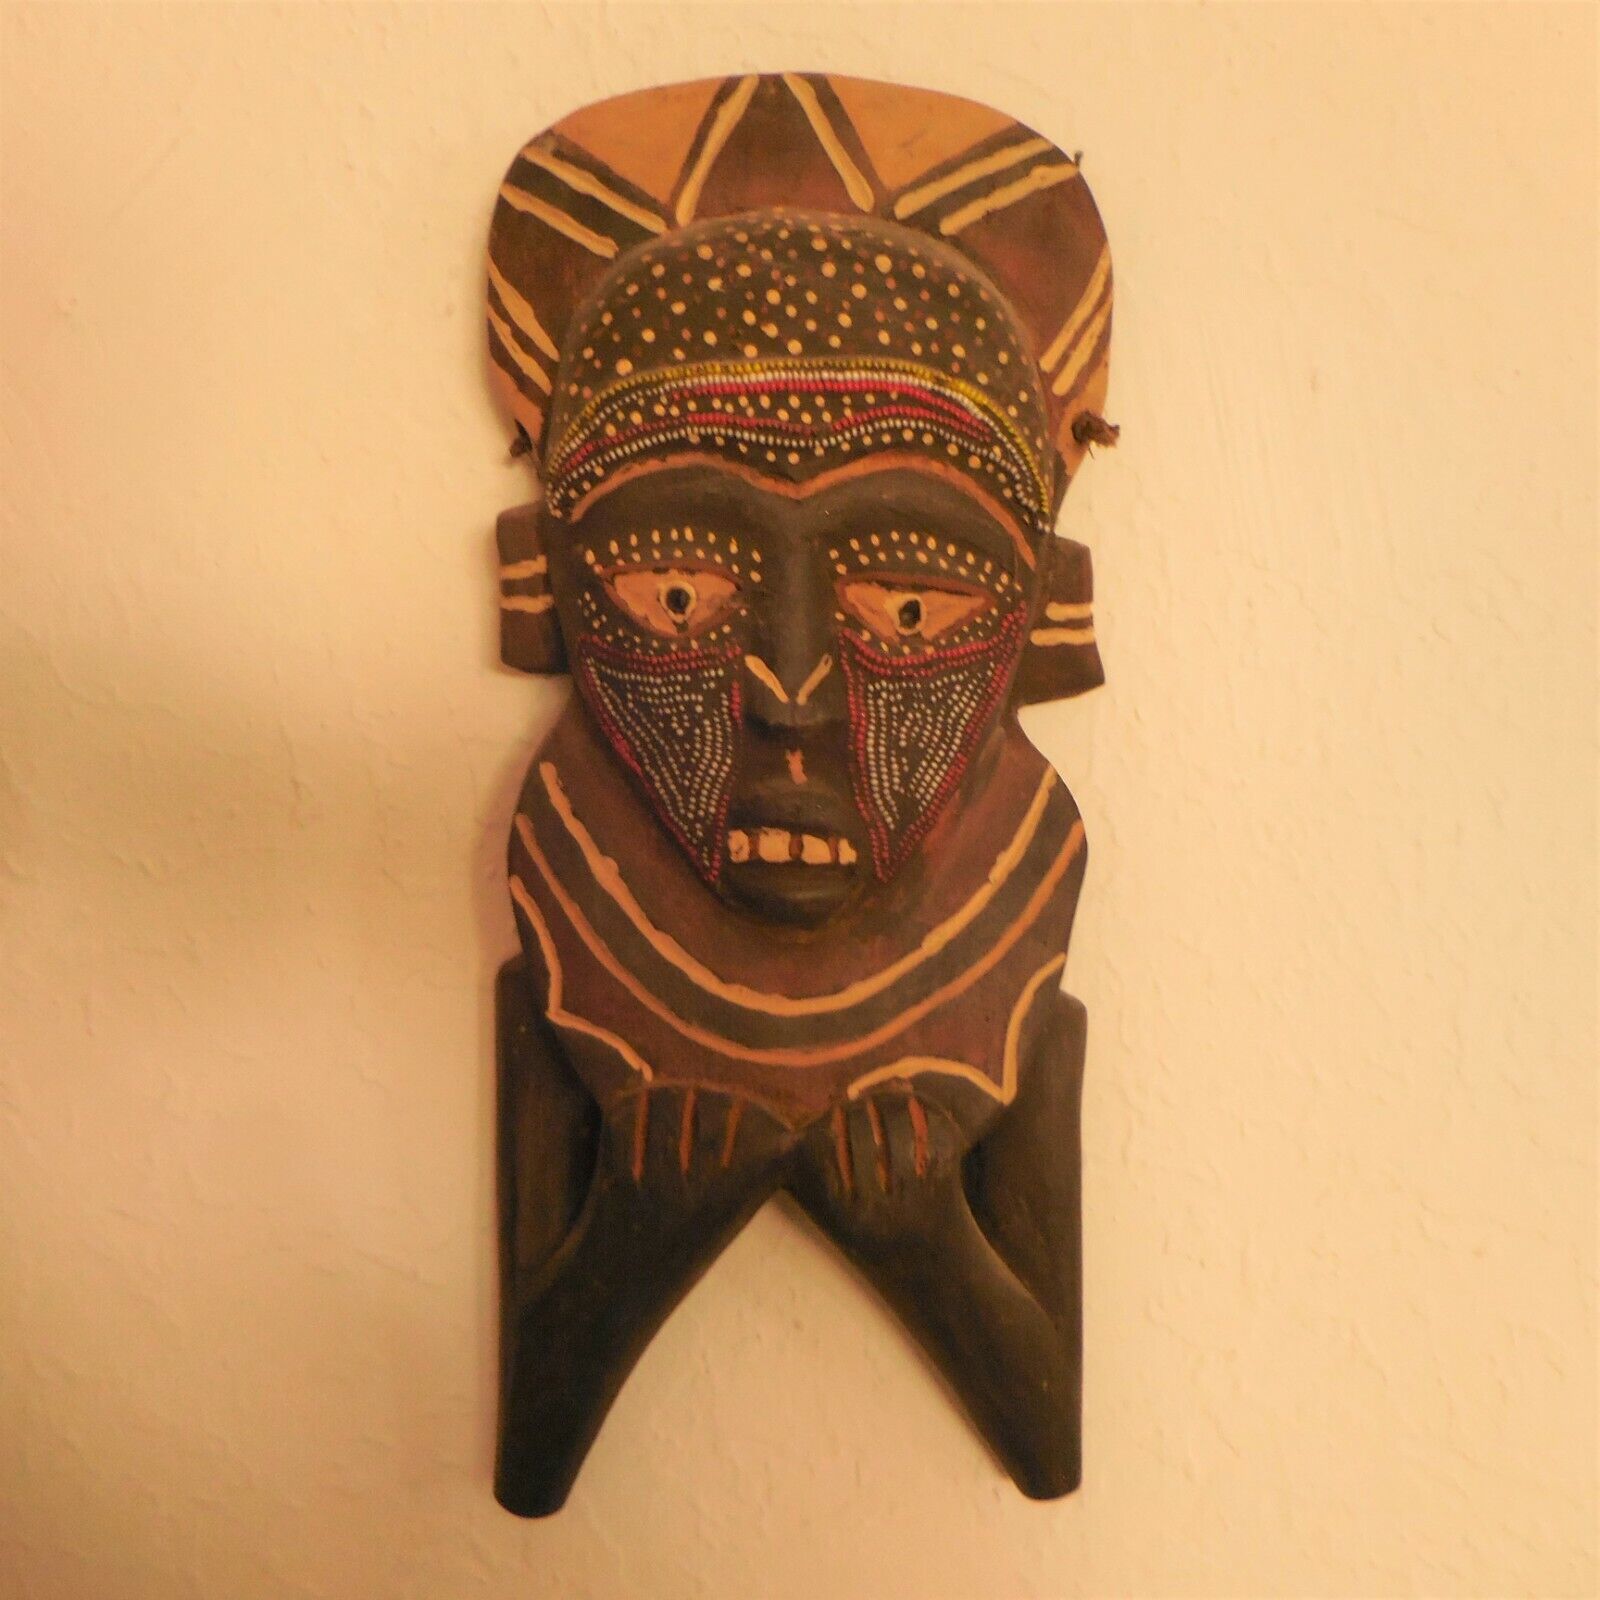 Vintage African Carved & Painted Wood Mask, Beaded to Represent Scarification